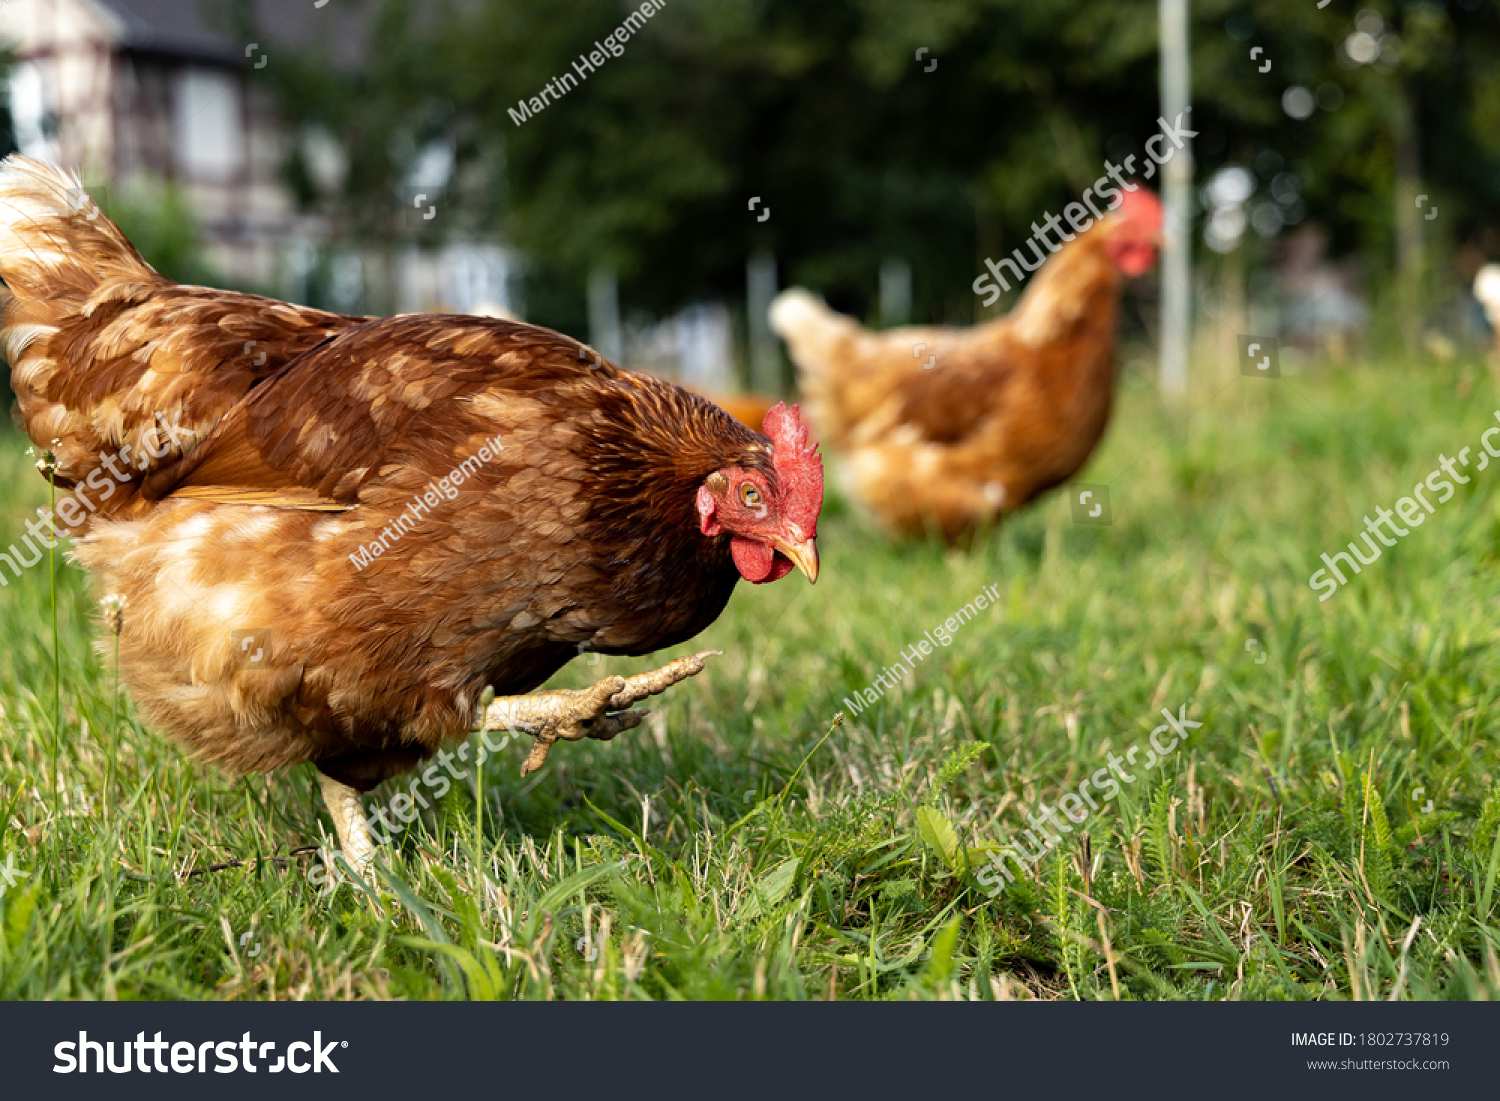 Free range organic chickens poultry in a country farm, germany #1802737819